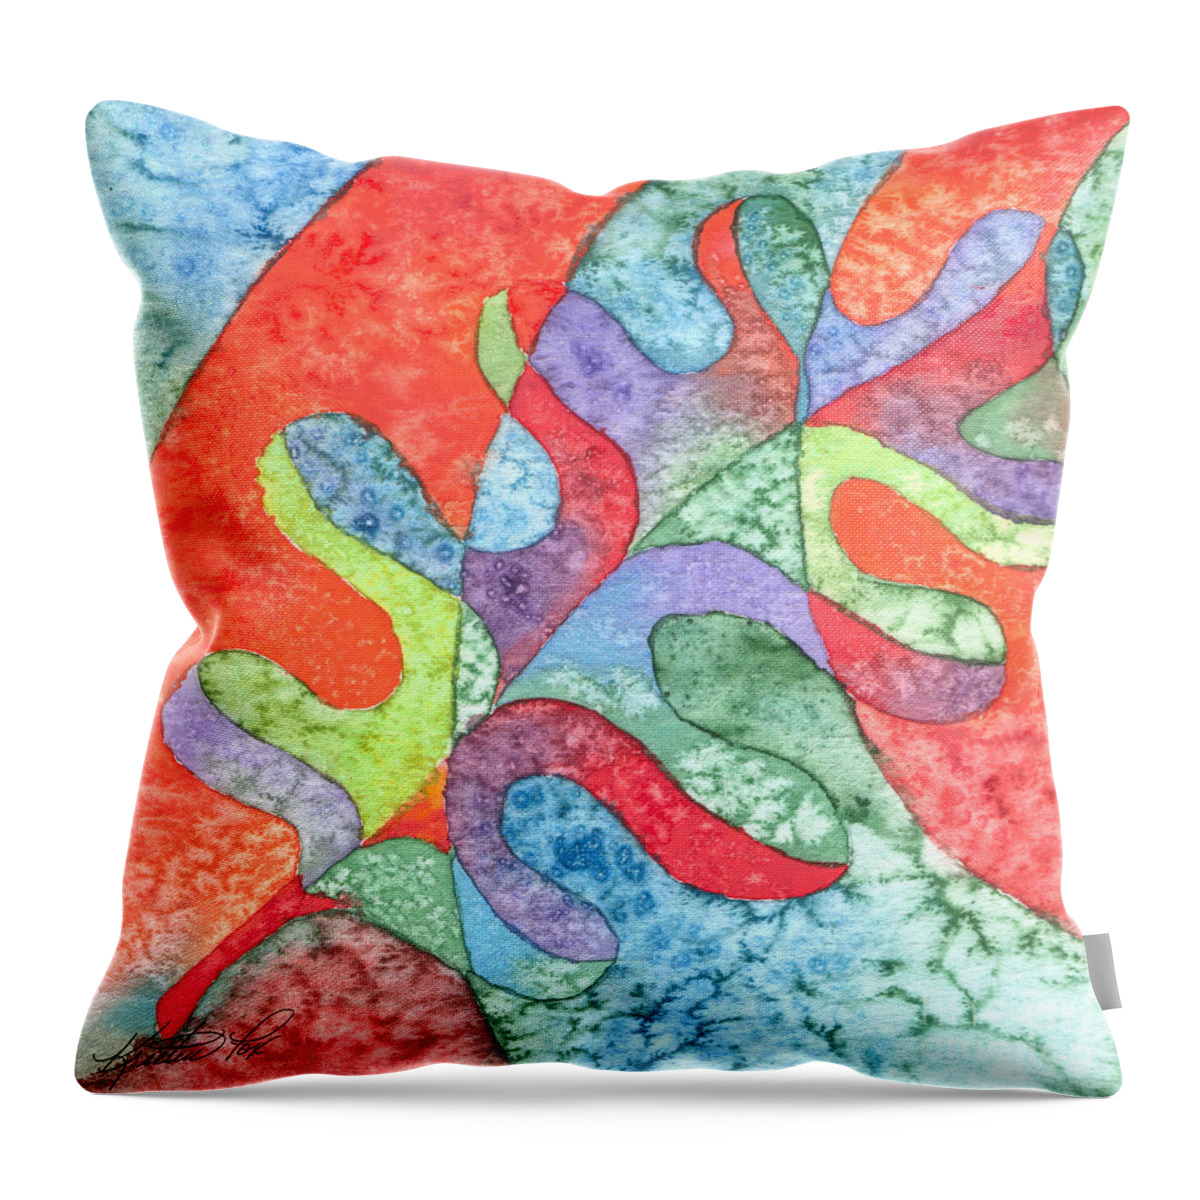 Artoffoxvox Throw Pillow featuring the painting Multicolor Oak Leaf by Kristen Fox